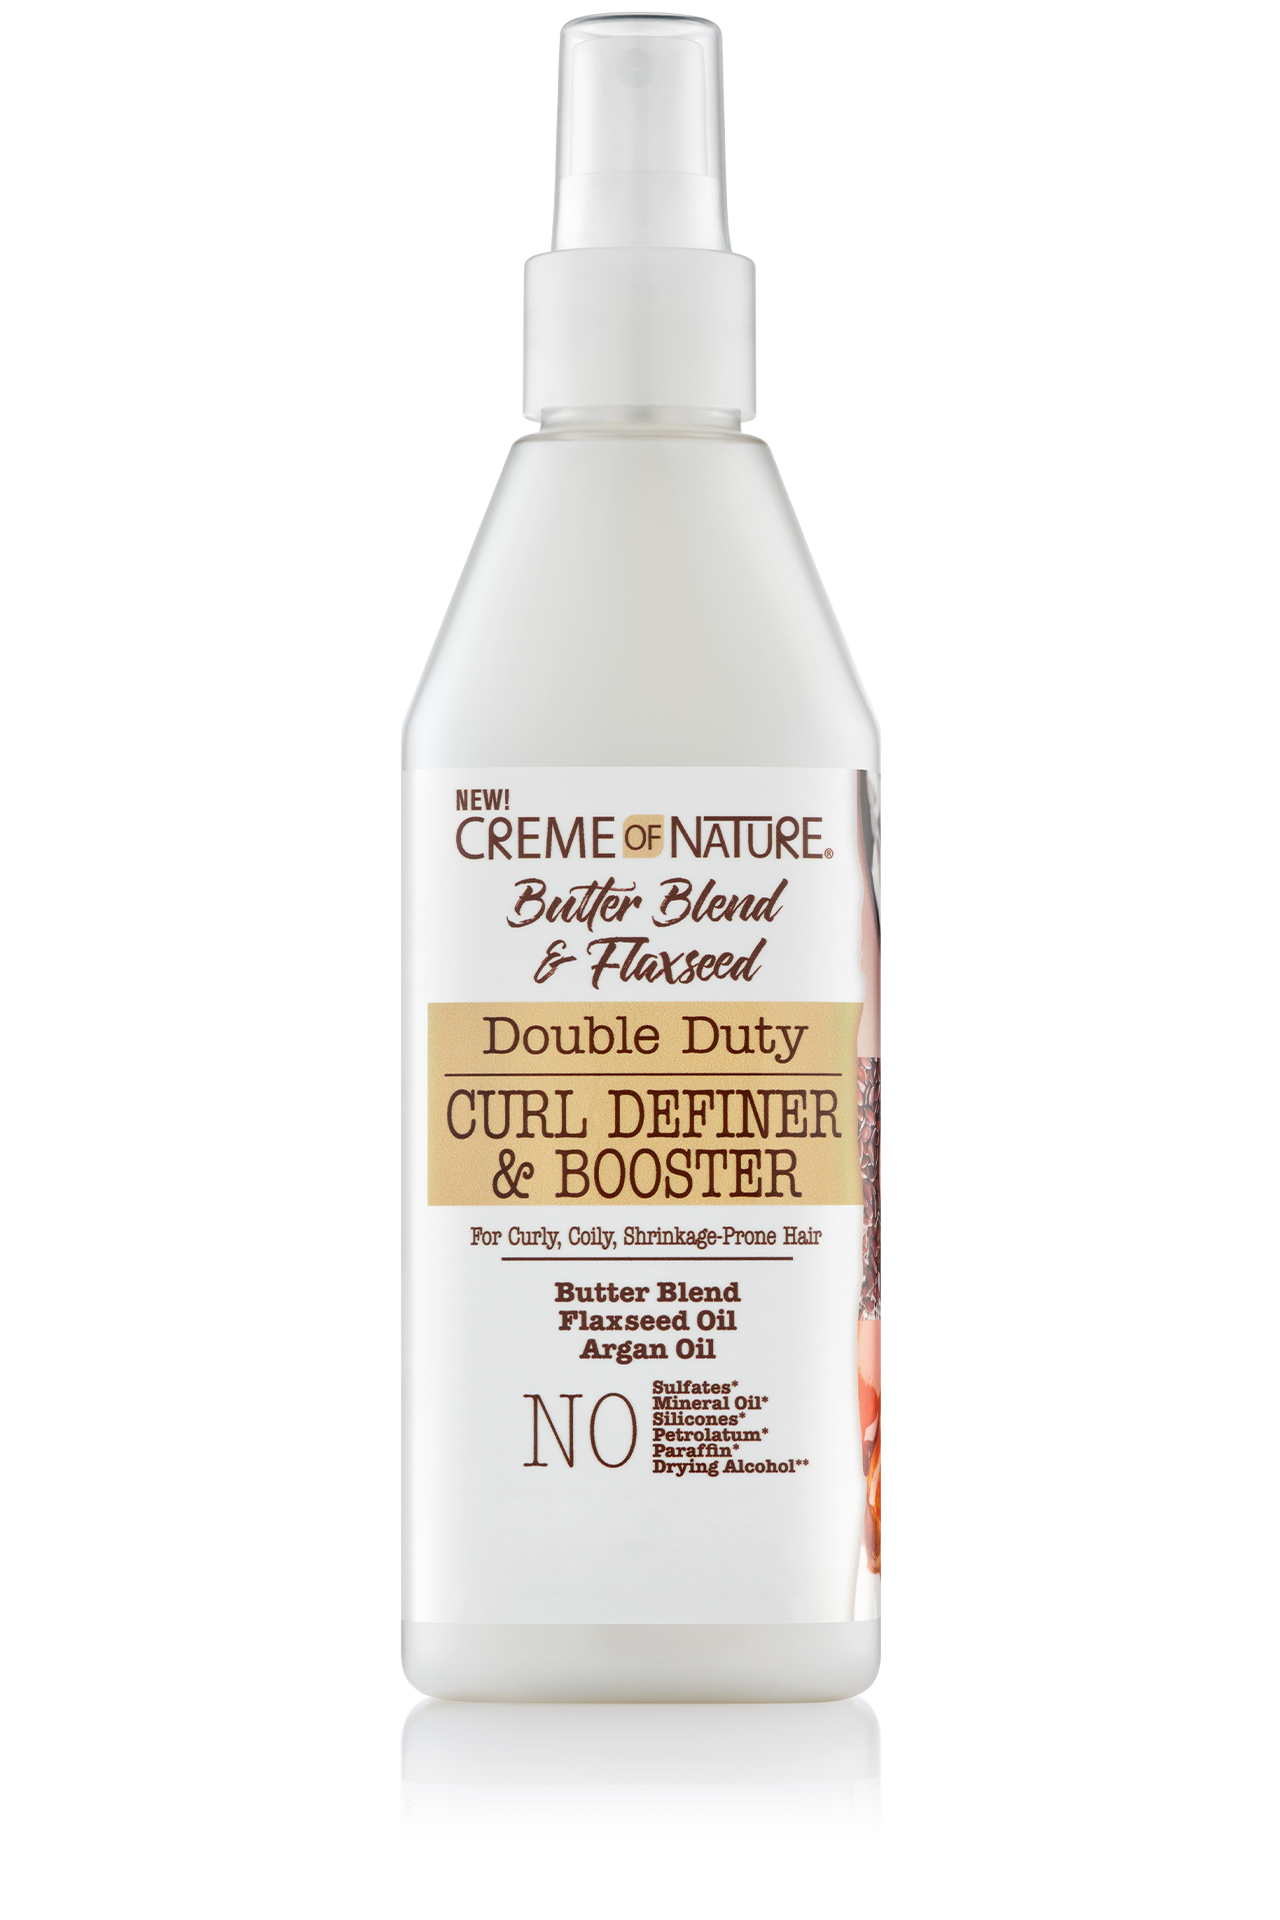 Creme of Nature Butter Blend & Flaxseed Curl Definer & Booster - 12 fl oz